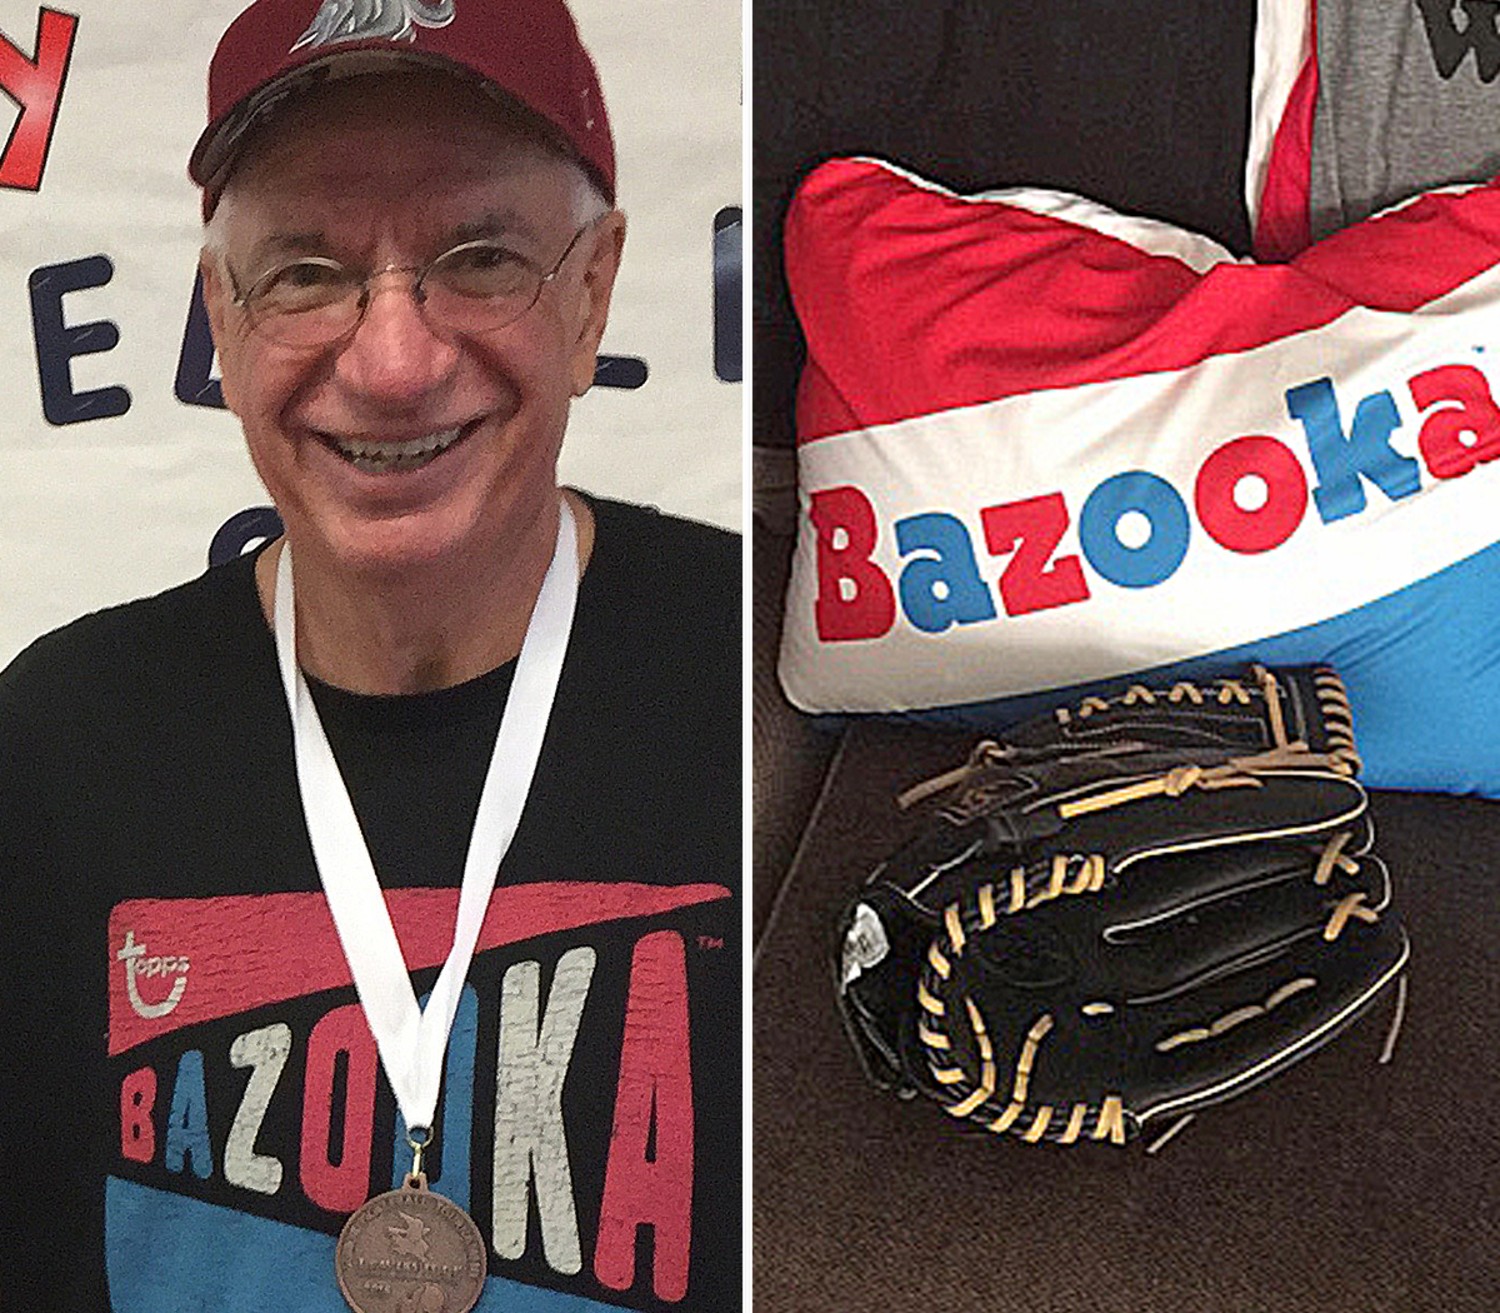 Orator spise Lang Chew on This: Texas Man Wins Bazooka Gum Prize Nearly 60 Years After Contest